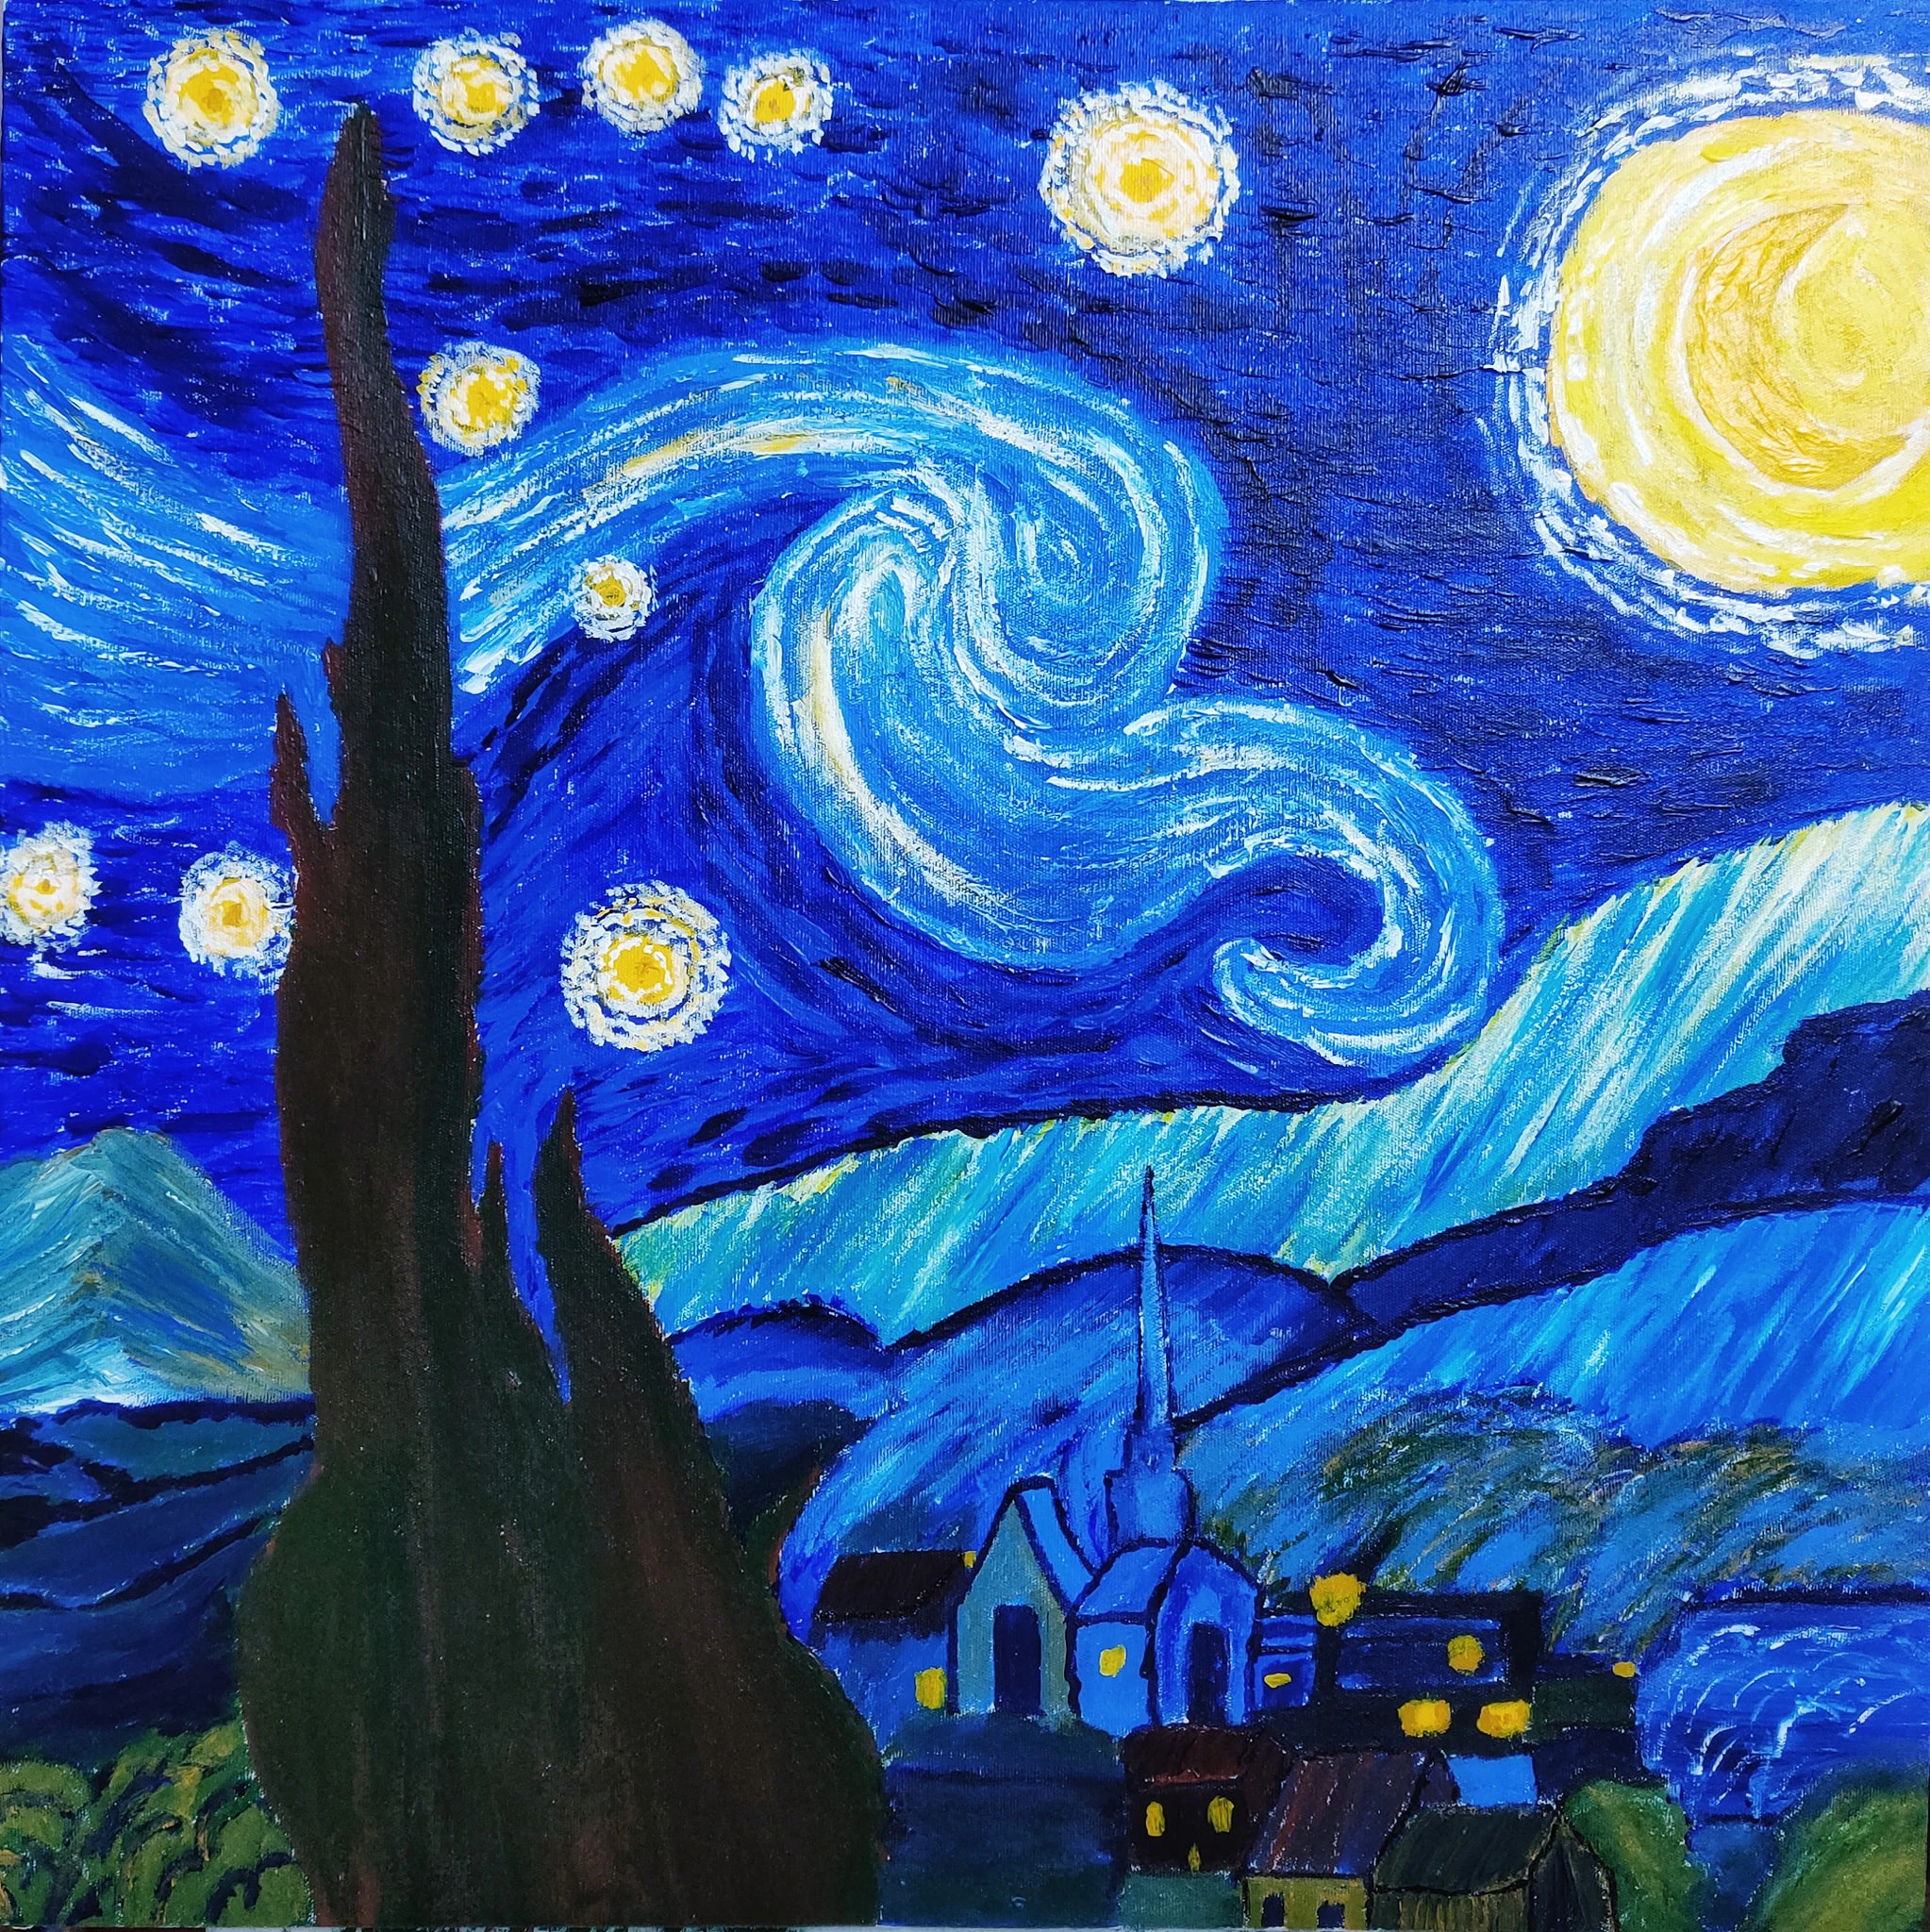 Recreated Painting: The Starry Night